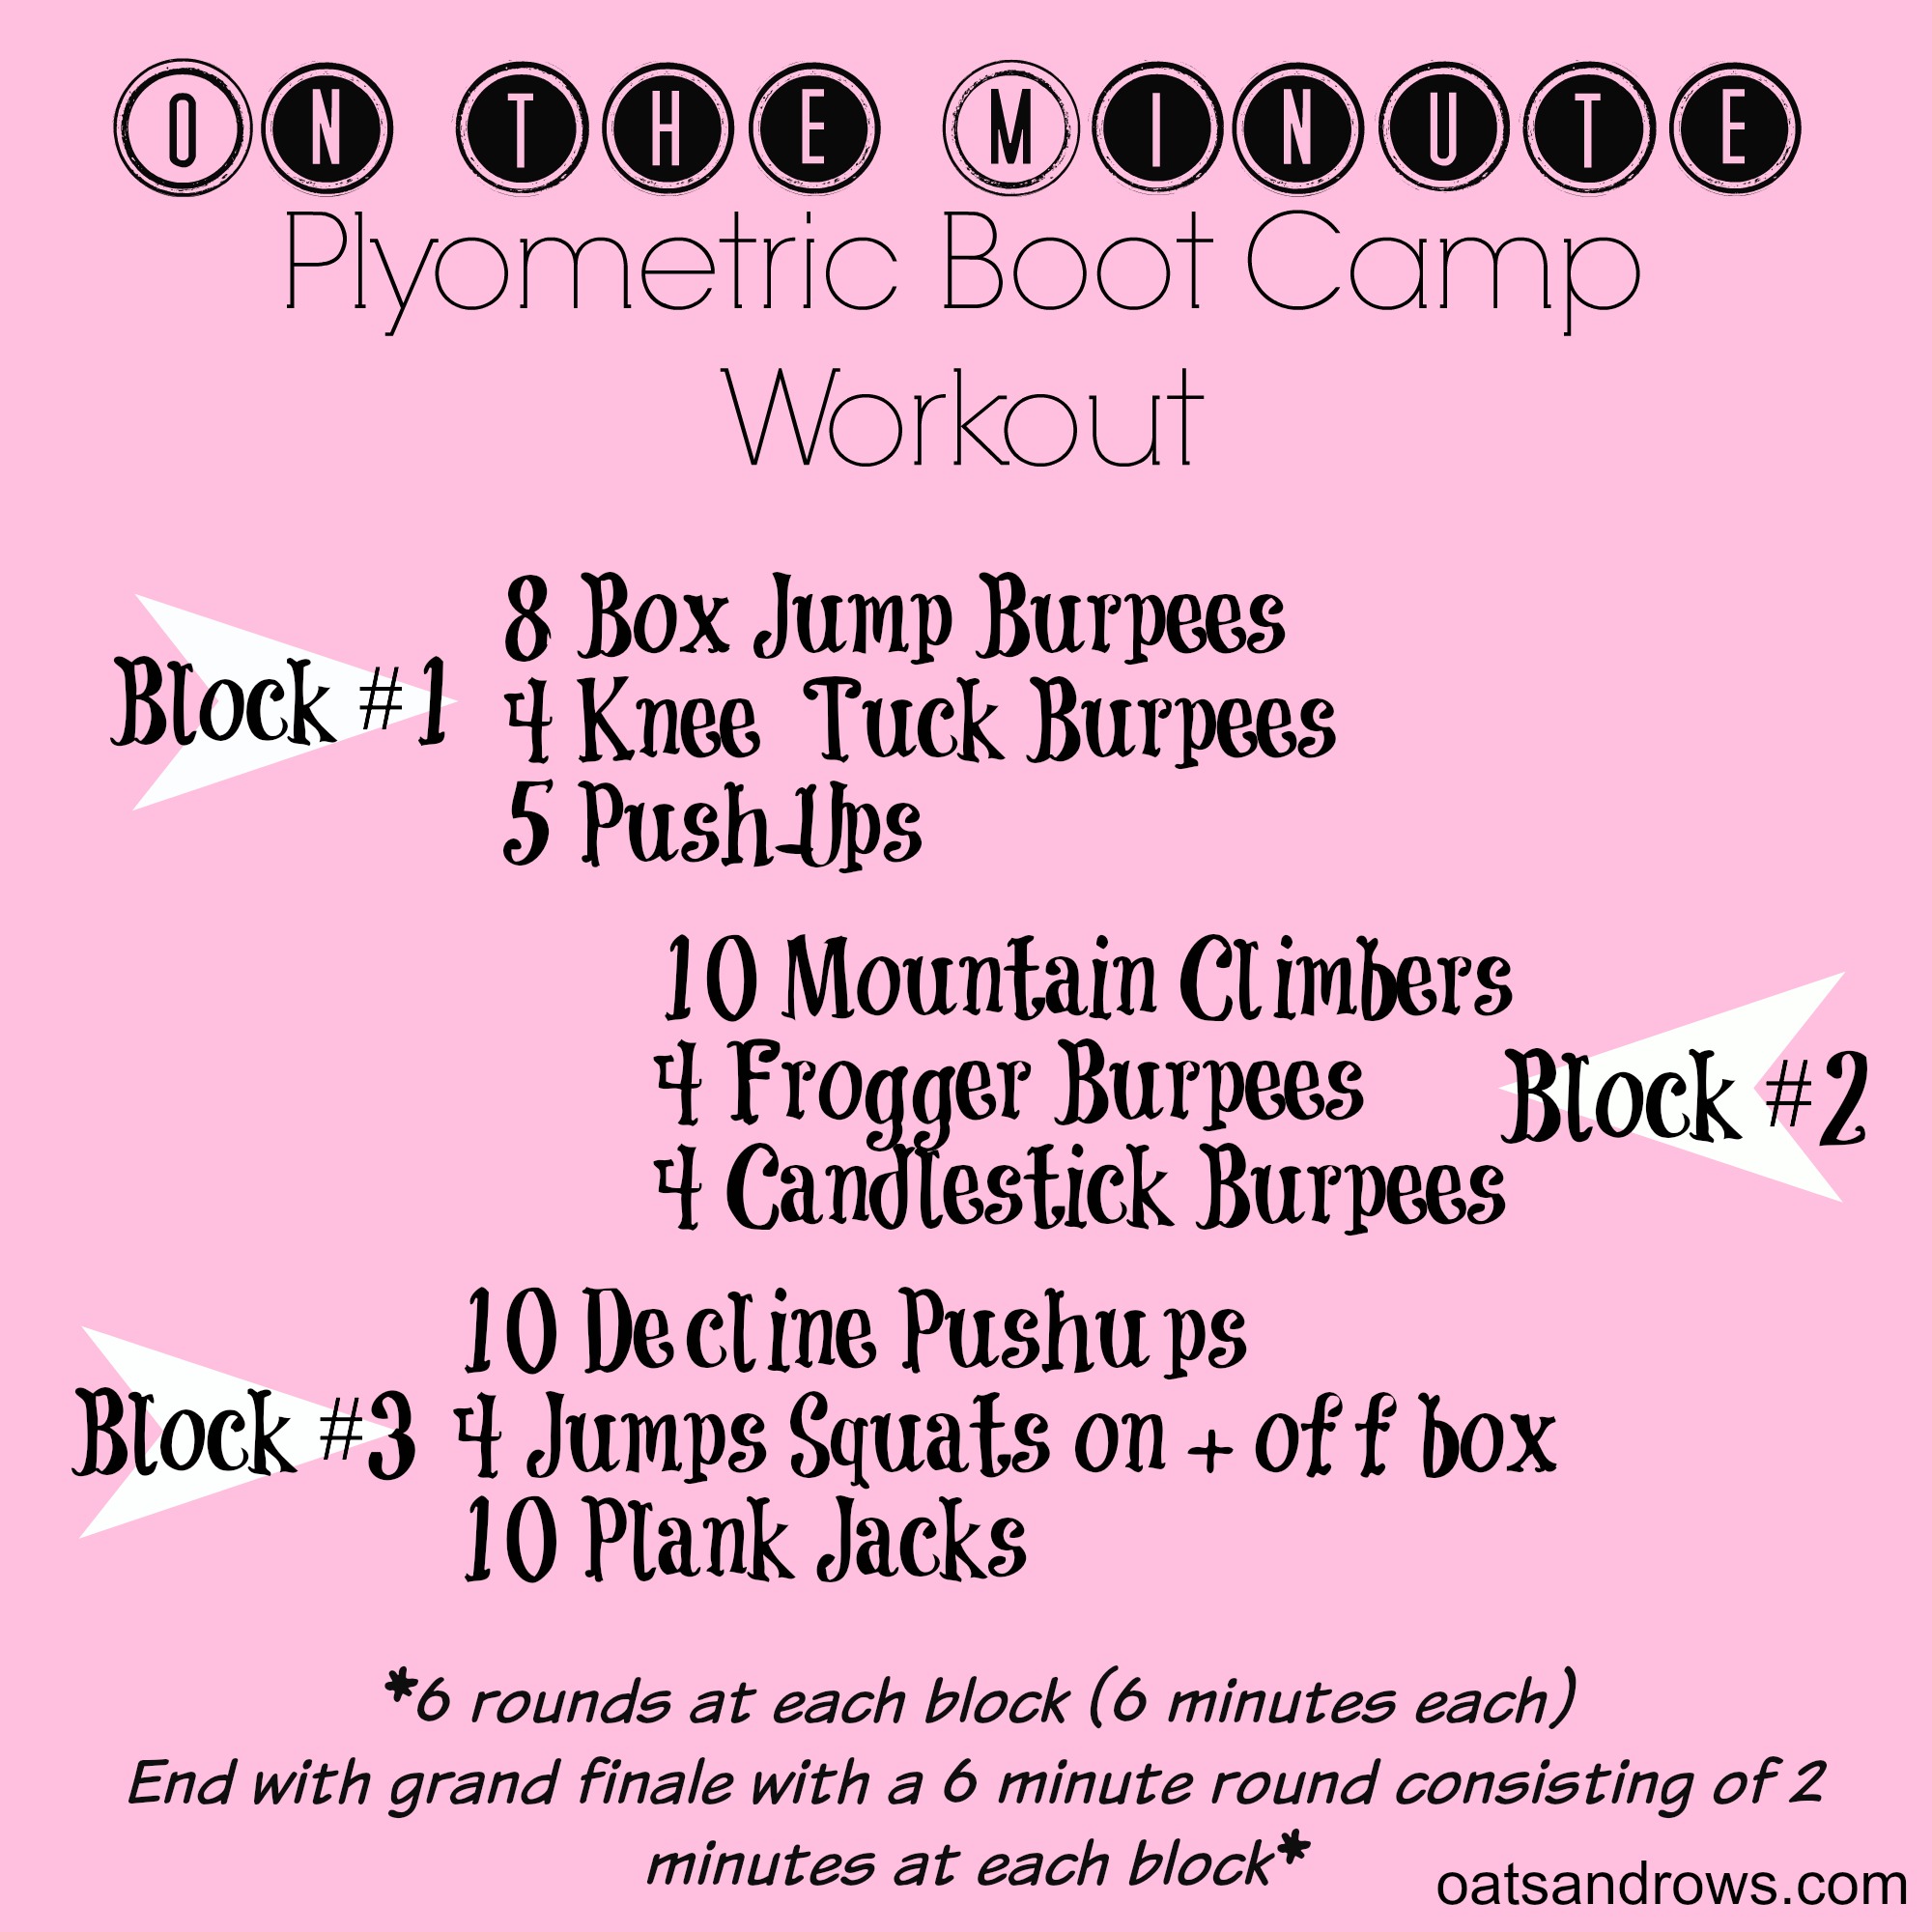 What is an example of a boot camp workout routine?